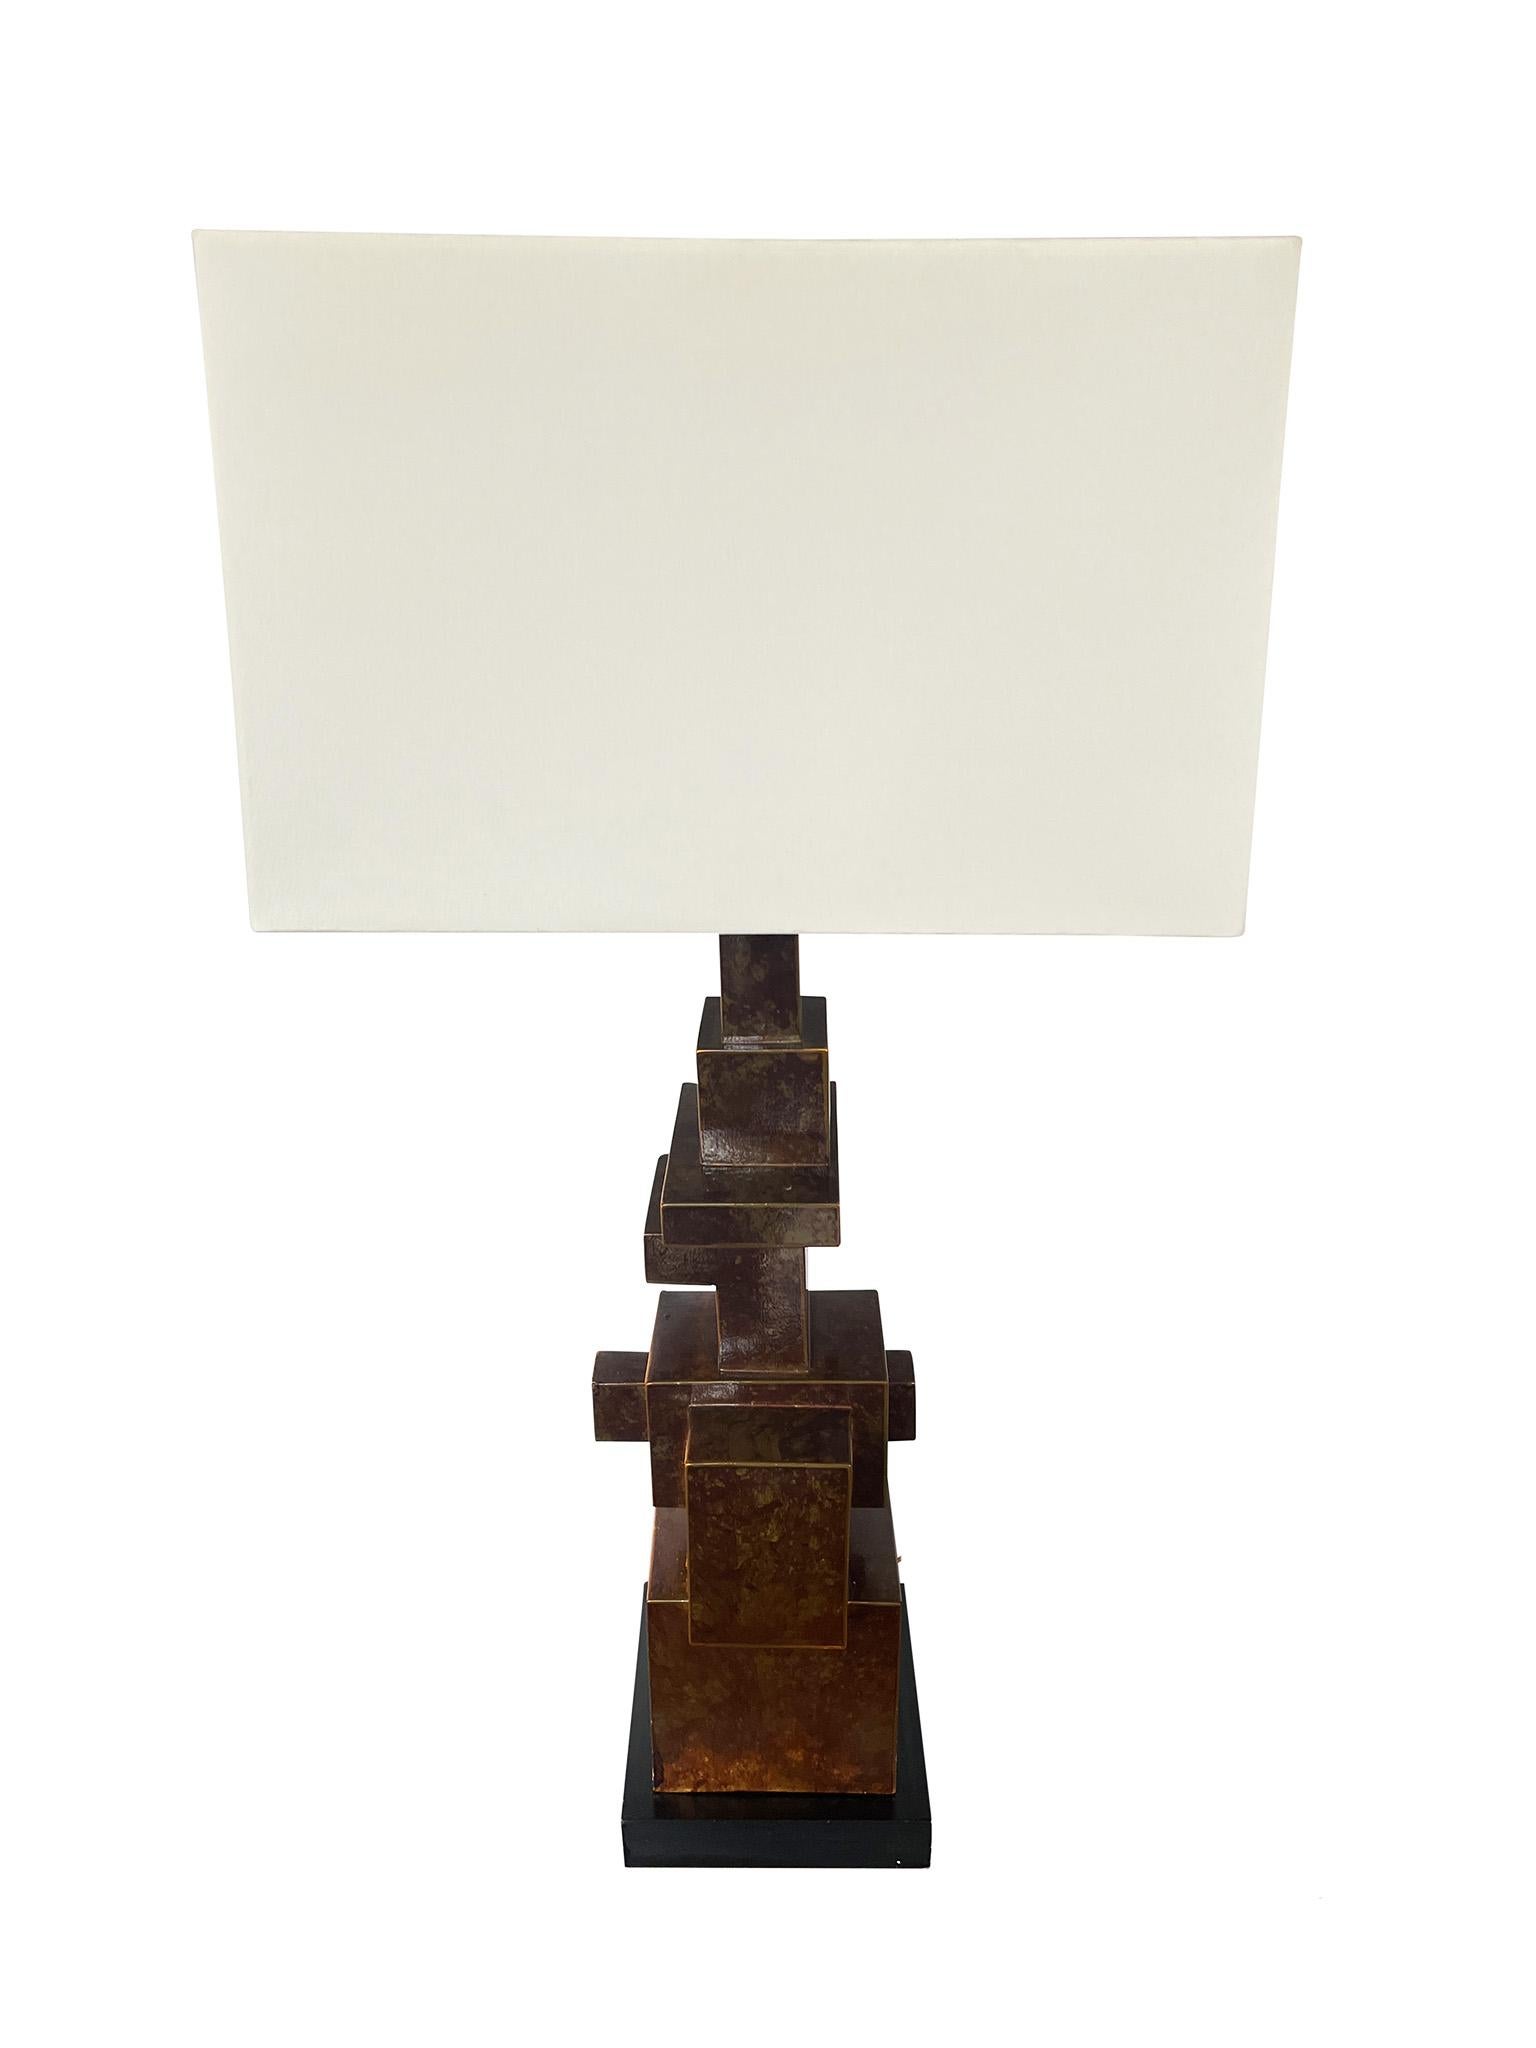 Unique Italian table lamp in the style of brutalism. Crafted in an patinated metal with a black wood base, the lamp is characterized by its unusually shaped and architectural composition, textured surface, and intentional distressing. Tested and